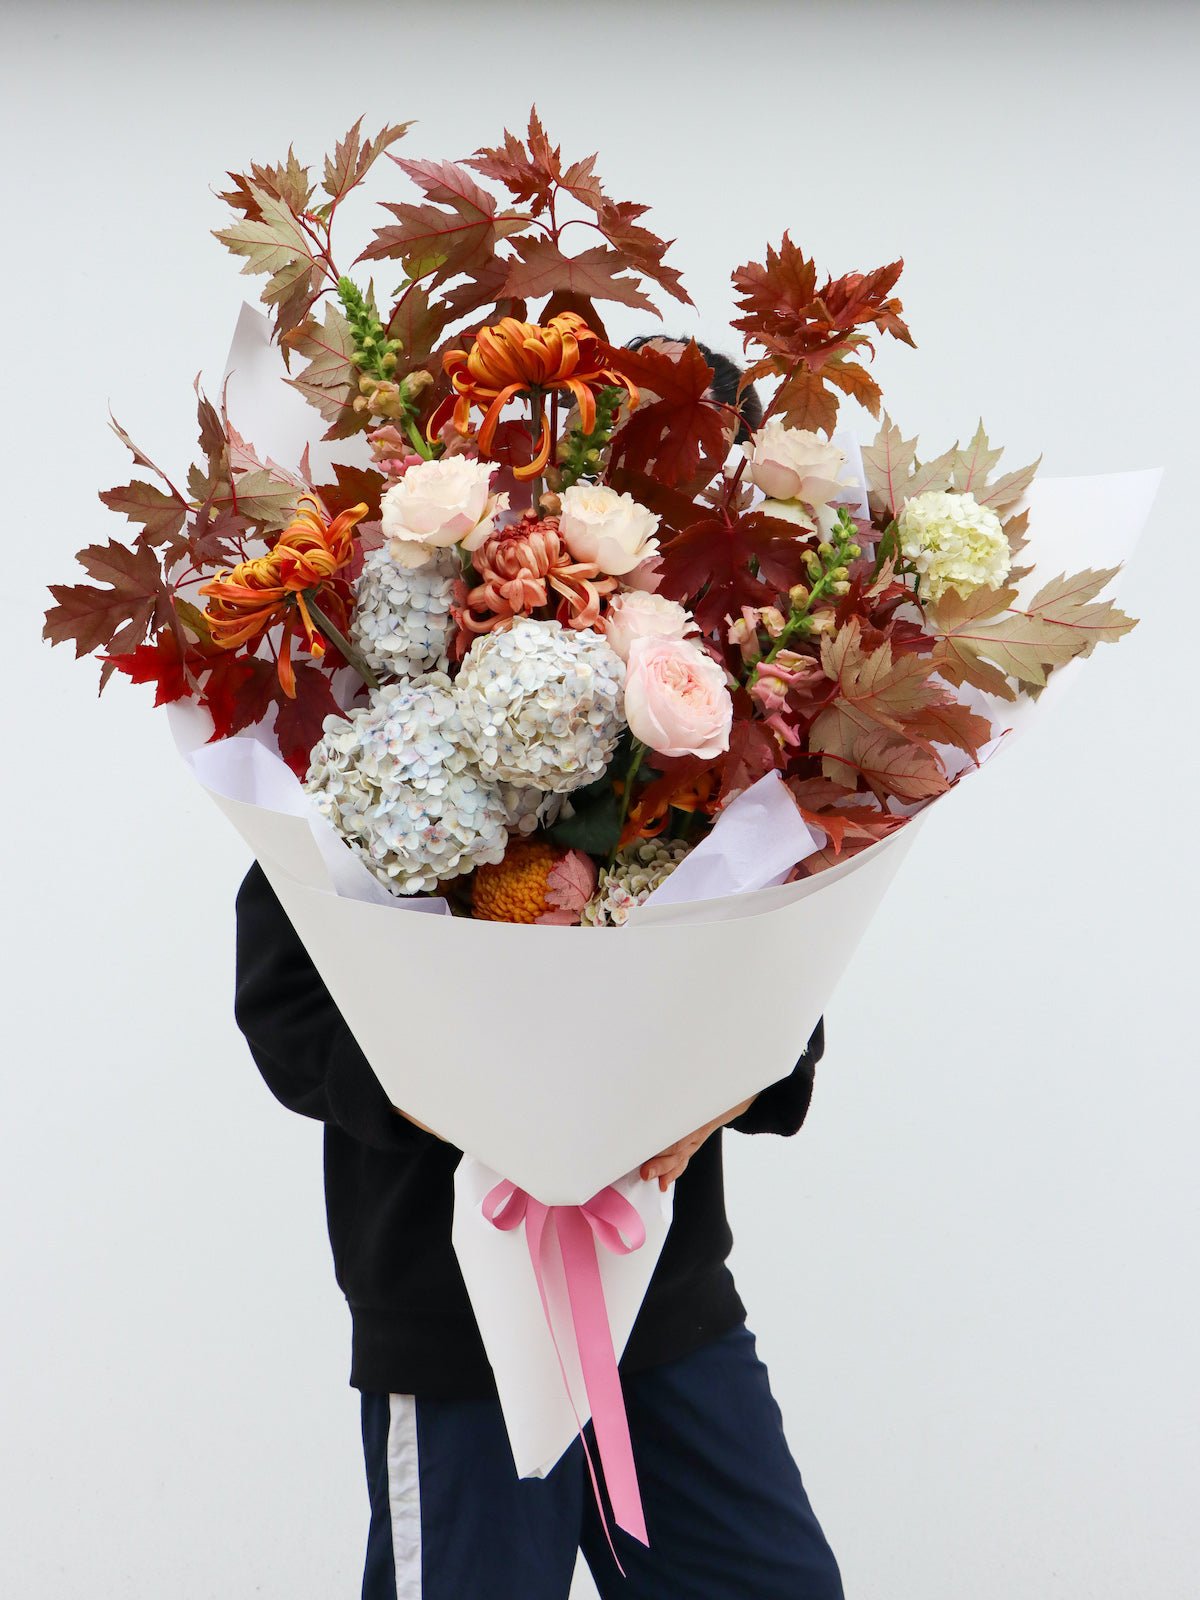 A large Autumnal toned bouquet wrapped in white paper and tied with a pink ribbon. The bouquet is held by a person in front of their body to show the large scale of the arrangement..